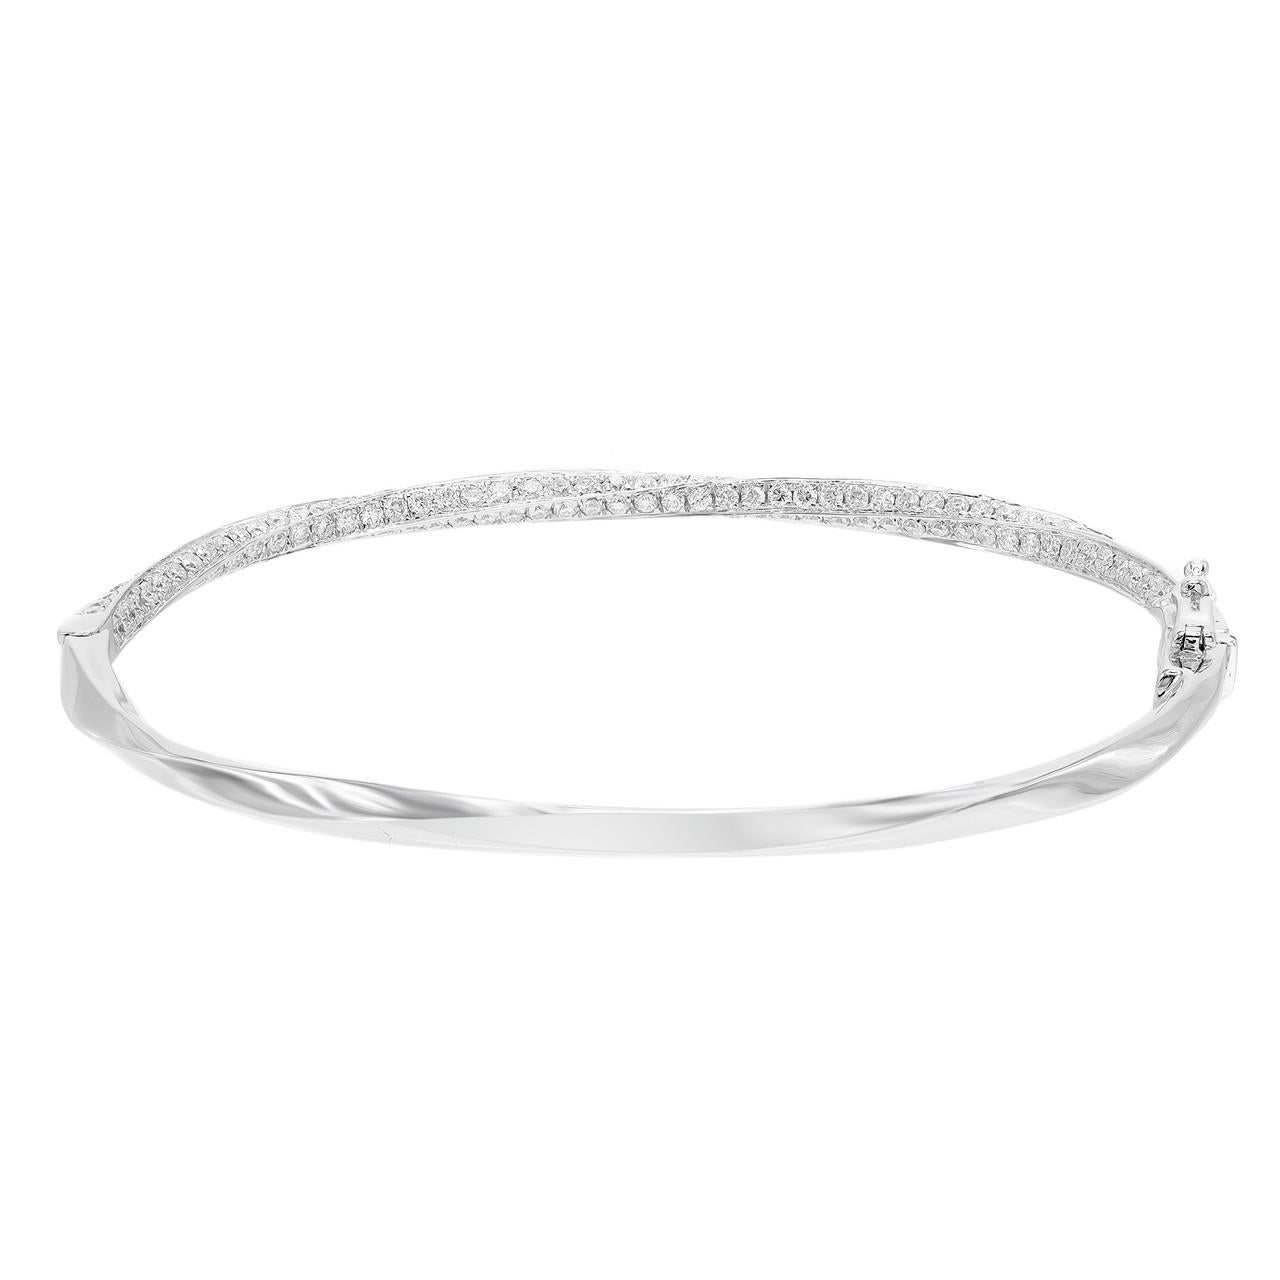 1.57 Carat Round Cut Diamond Bangle Bracelet 18K White Gold In New Condition For Sale In New York, NY